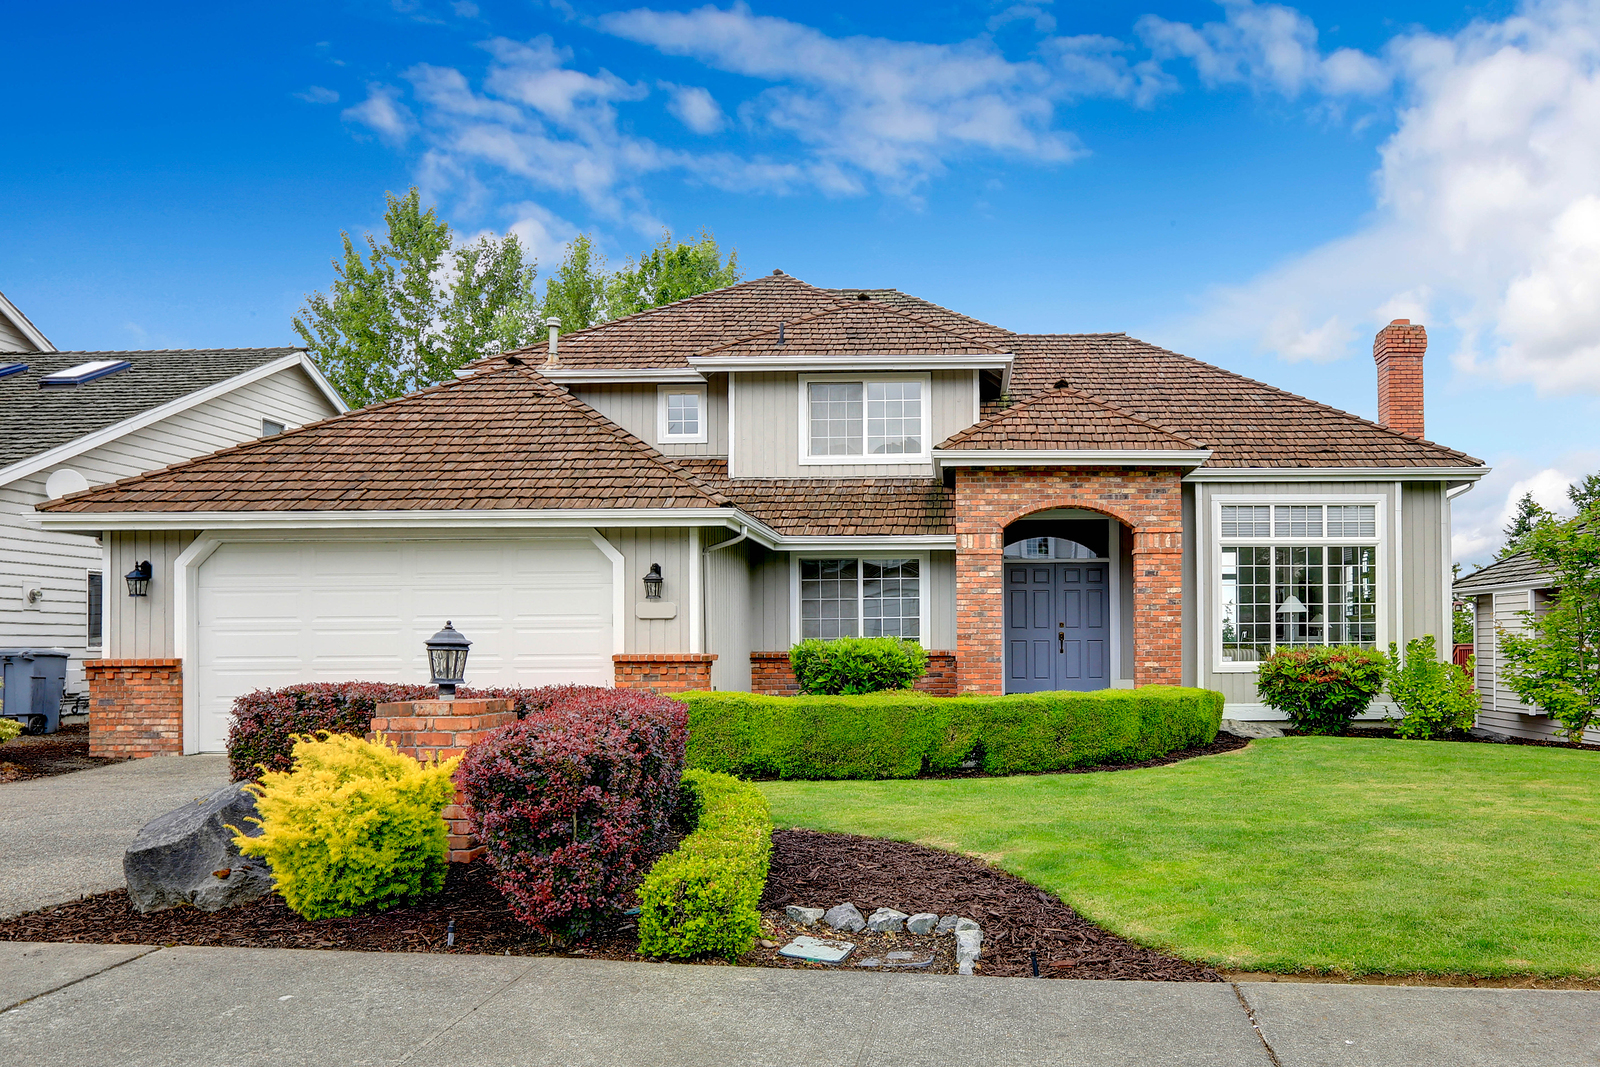 Classic house exterior with brick trimmed entrance porch green lawn and trimmed hedges. Garage with driveway